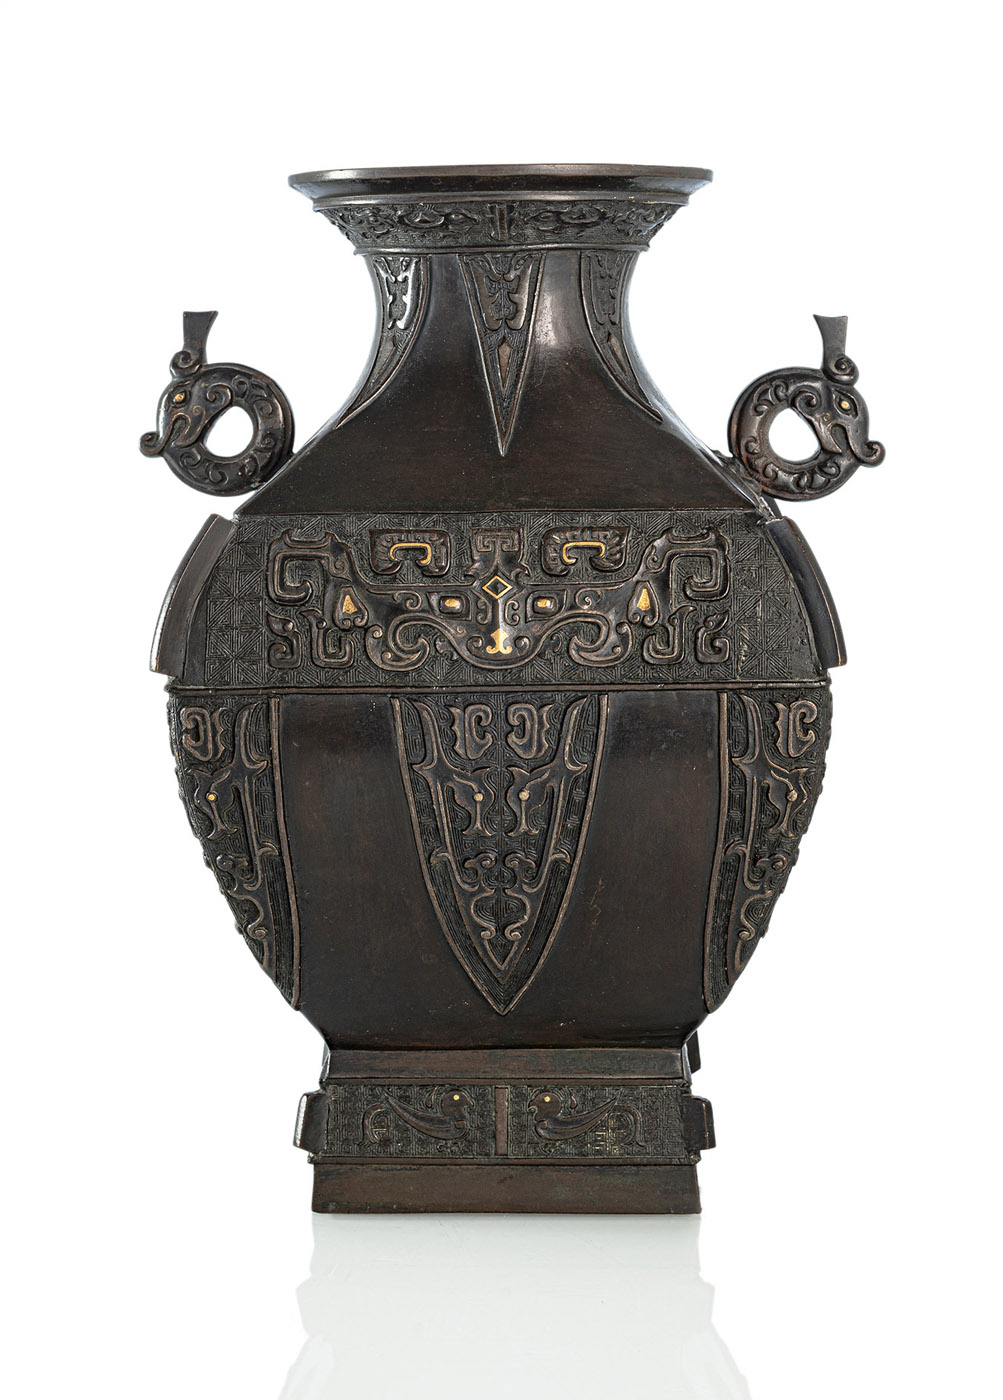 <b>A FINE HU-SHAPED BRONZE VASE WITH GOLD- AND SILVER INLAYS</b>